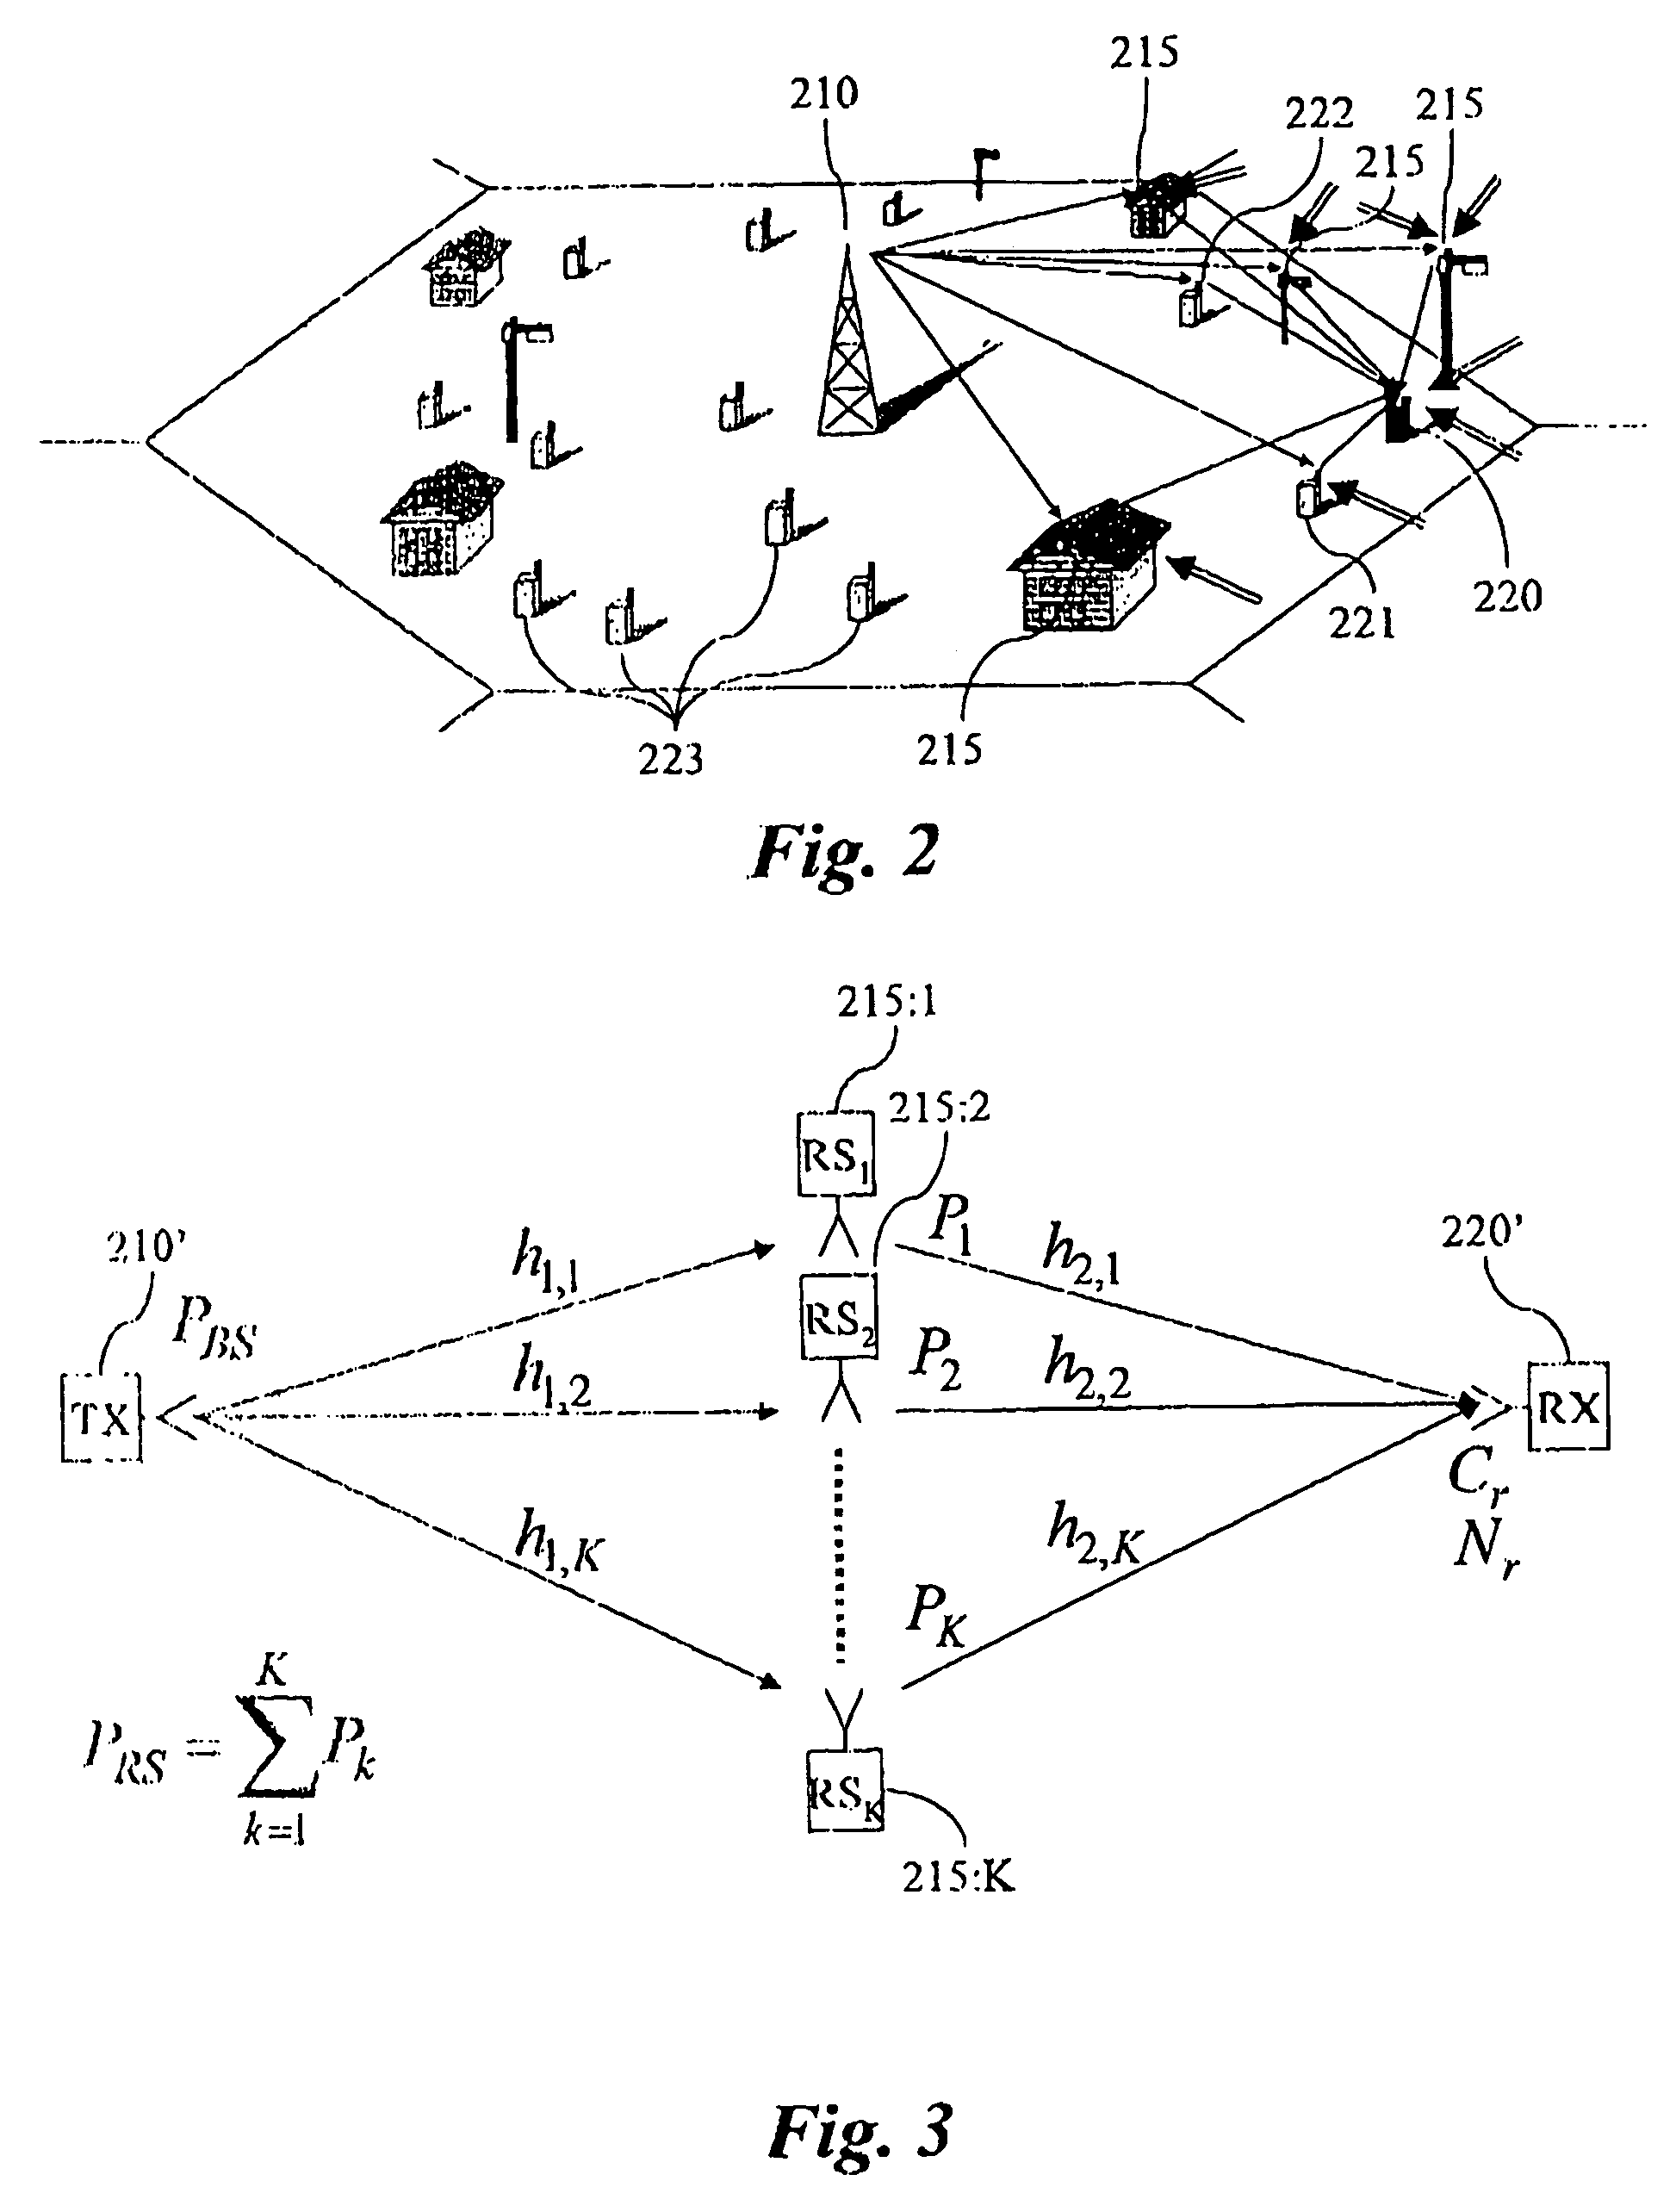 Method and architecture for wireless communication networks using cooperative relaying